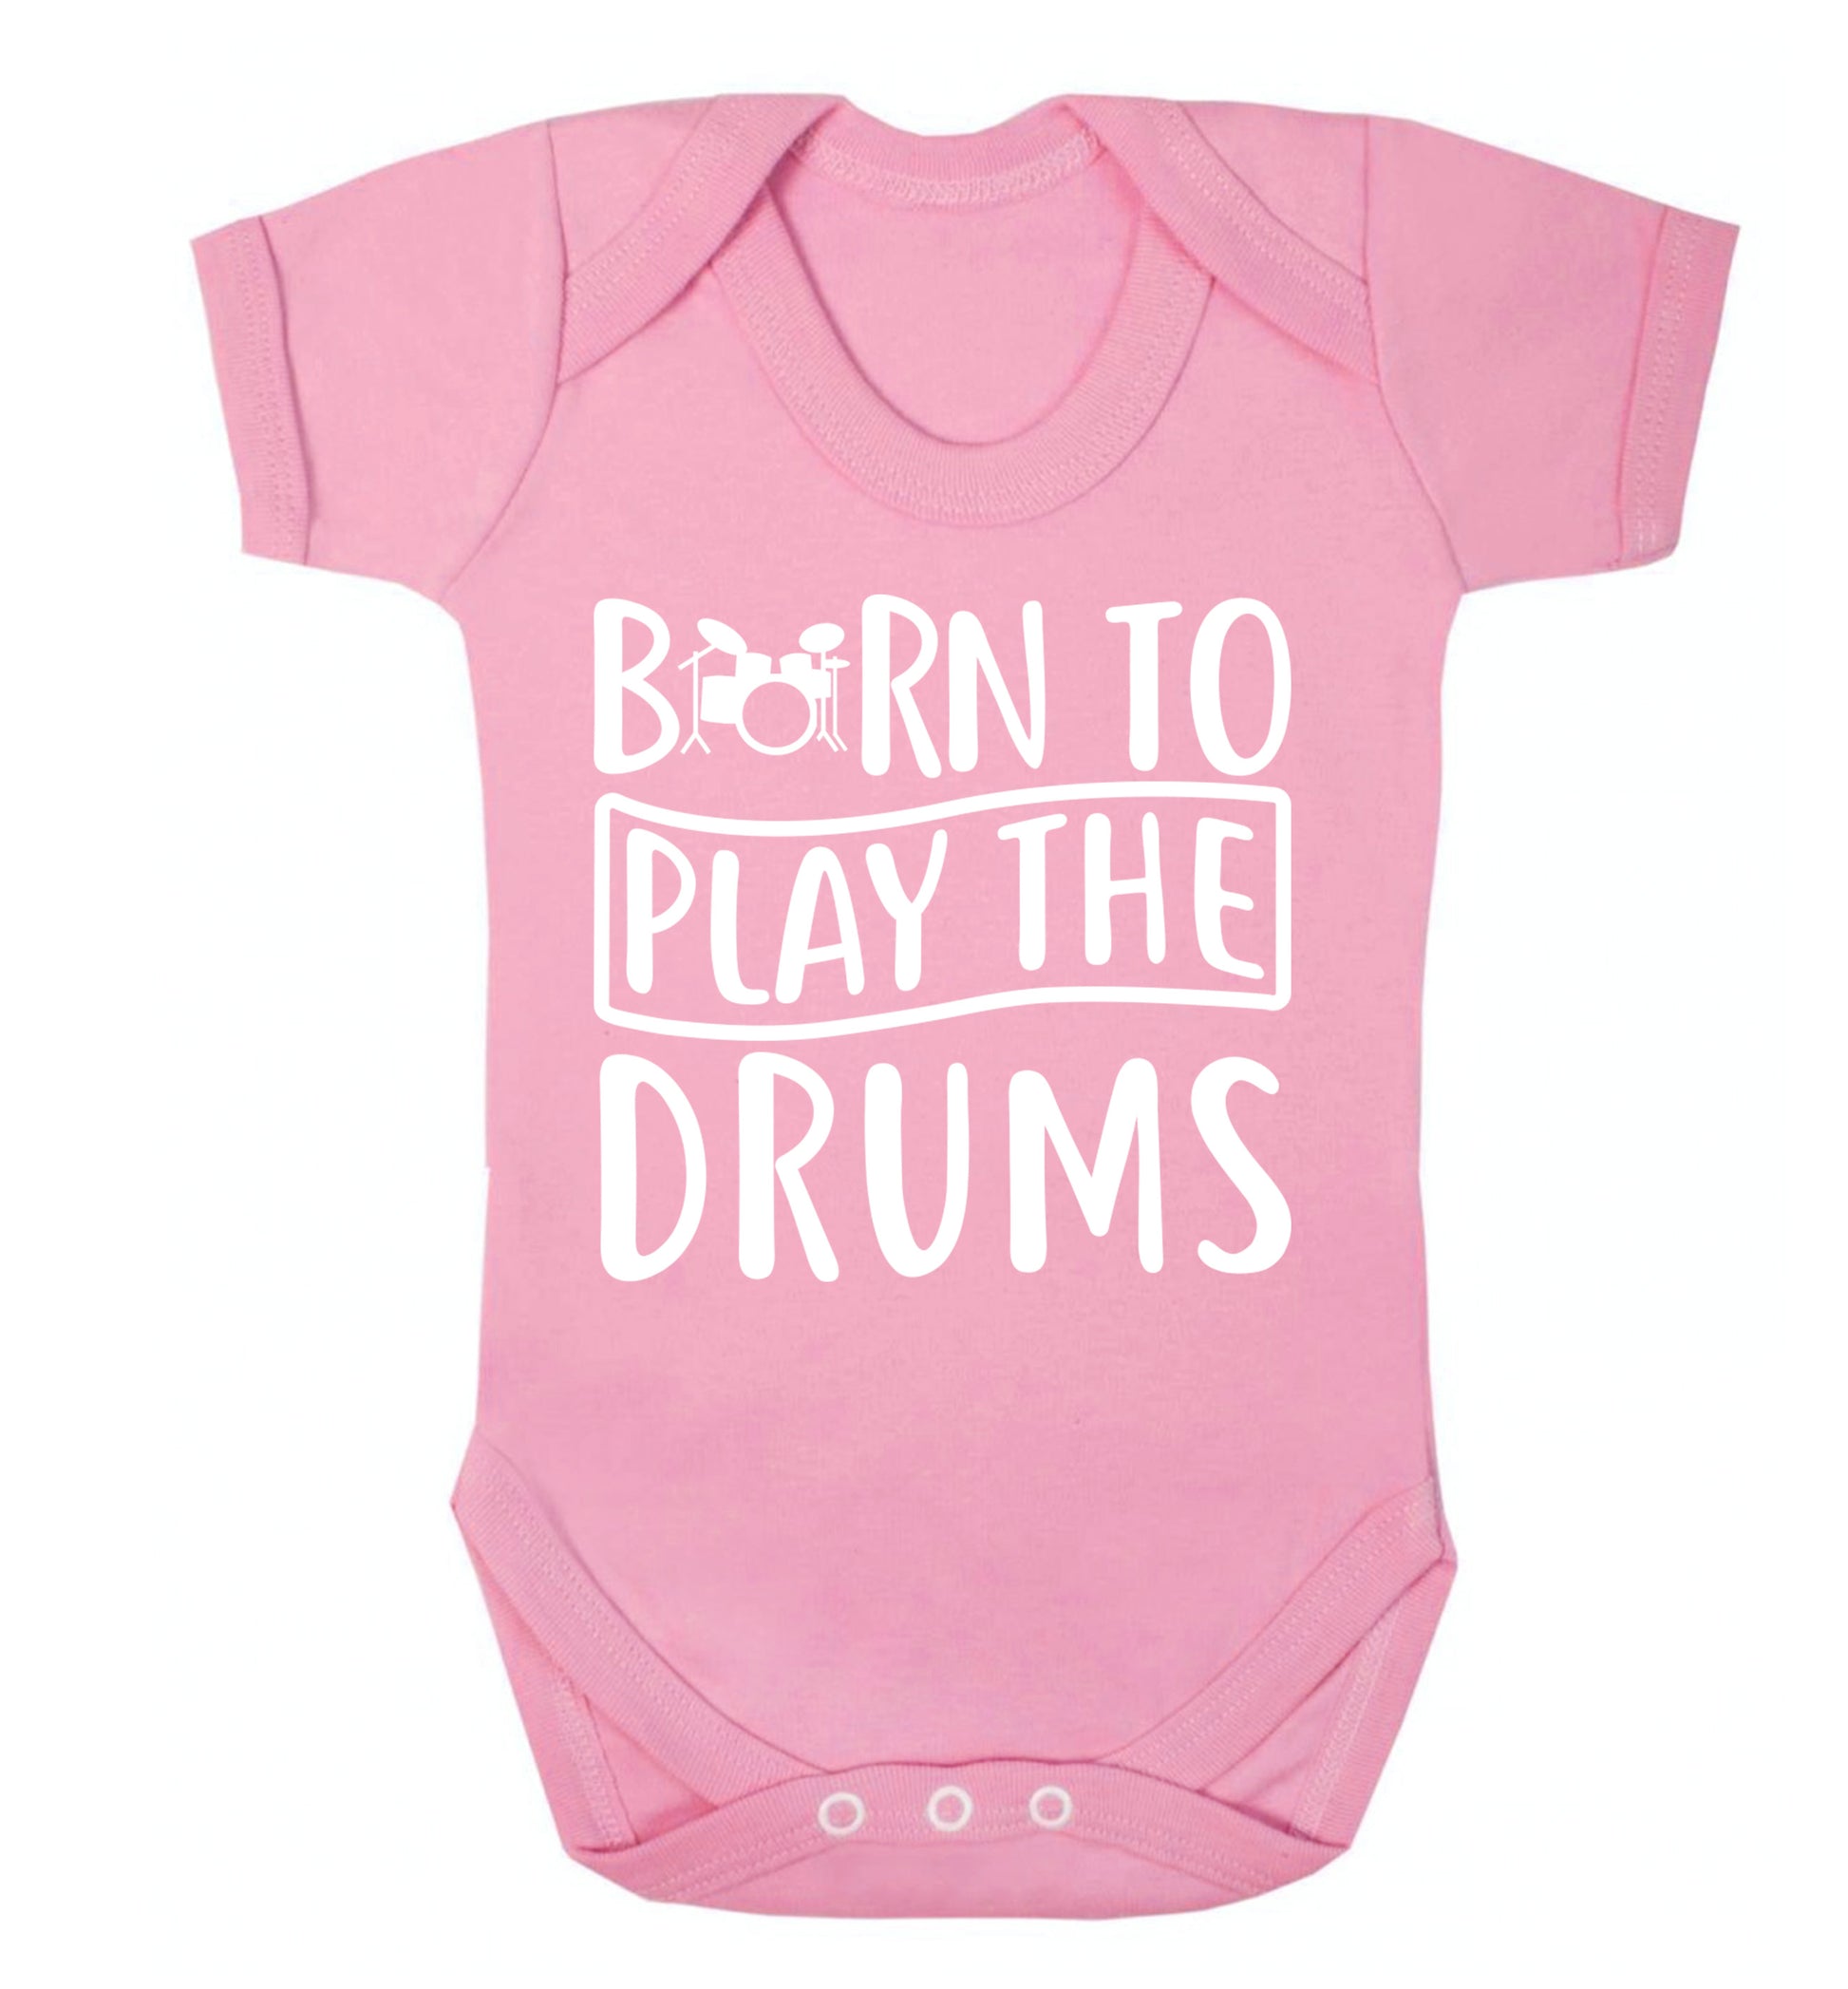 Born to play the drums Baby Vest pale pink 18-24 months